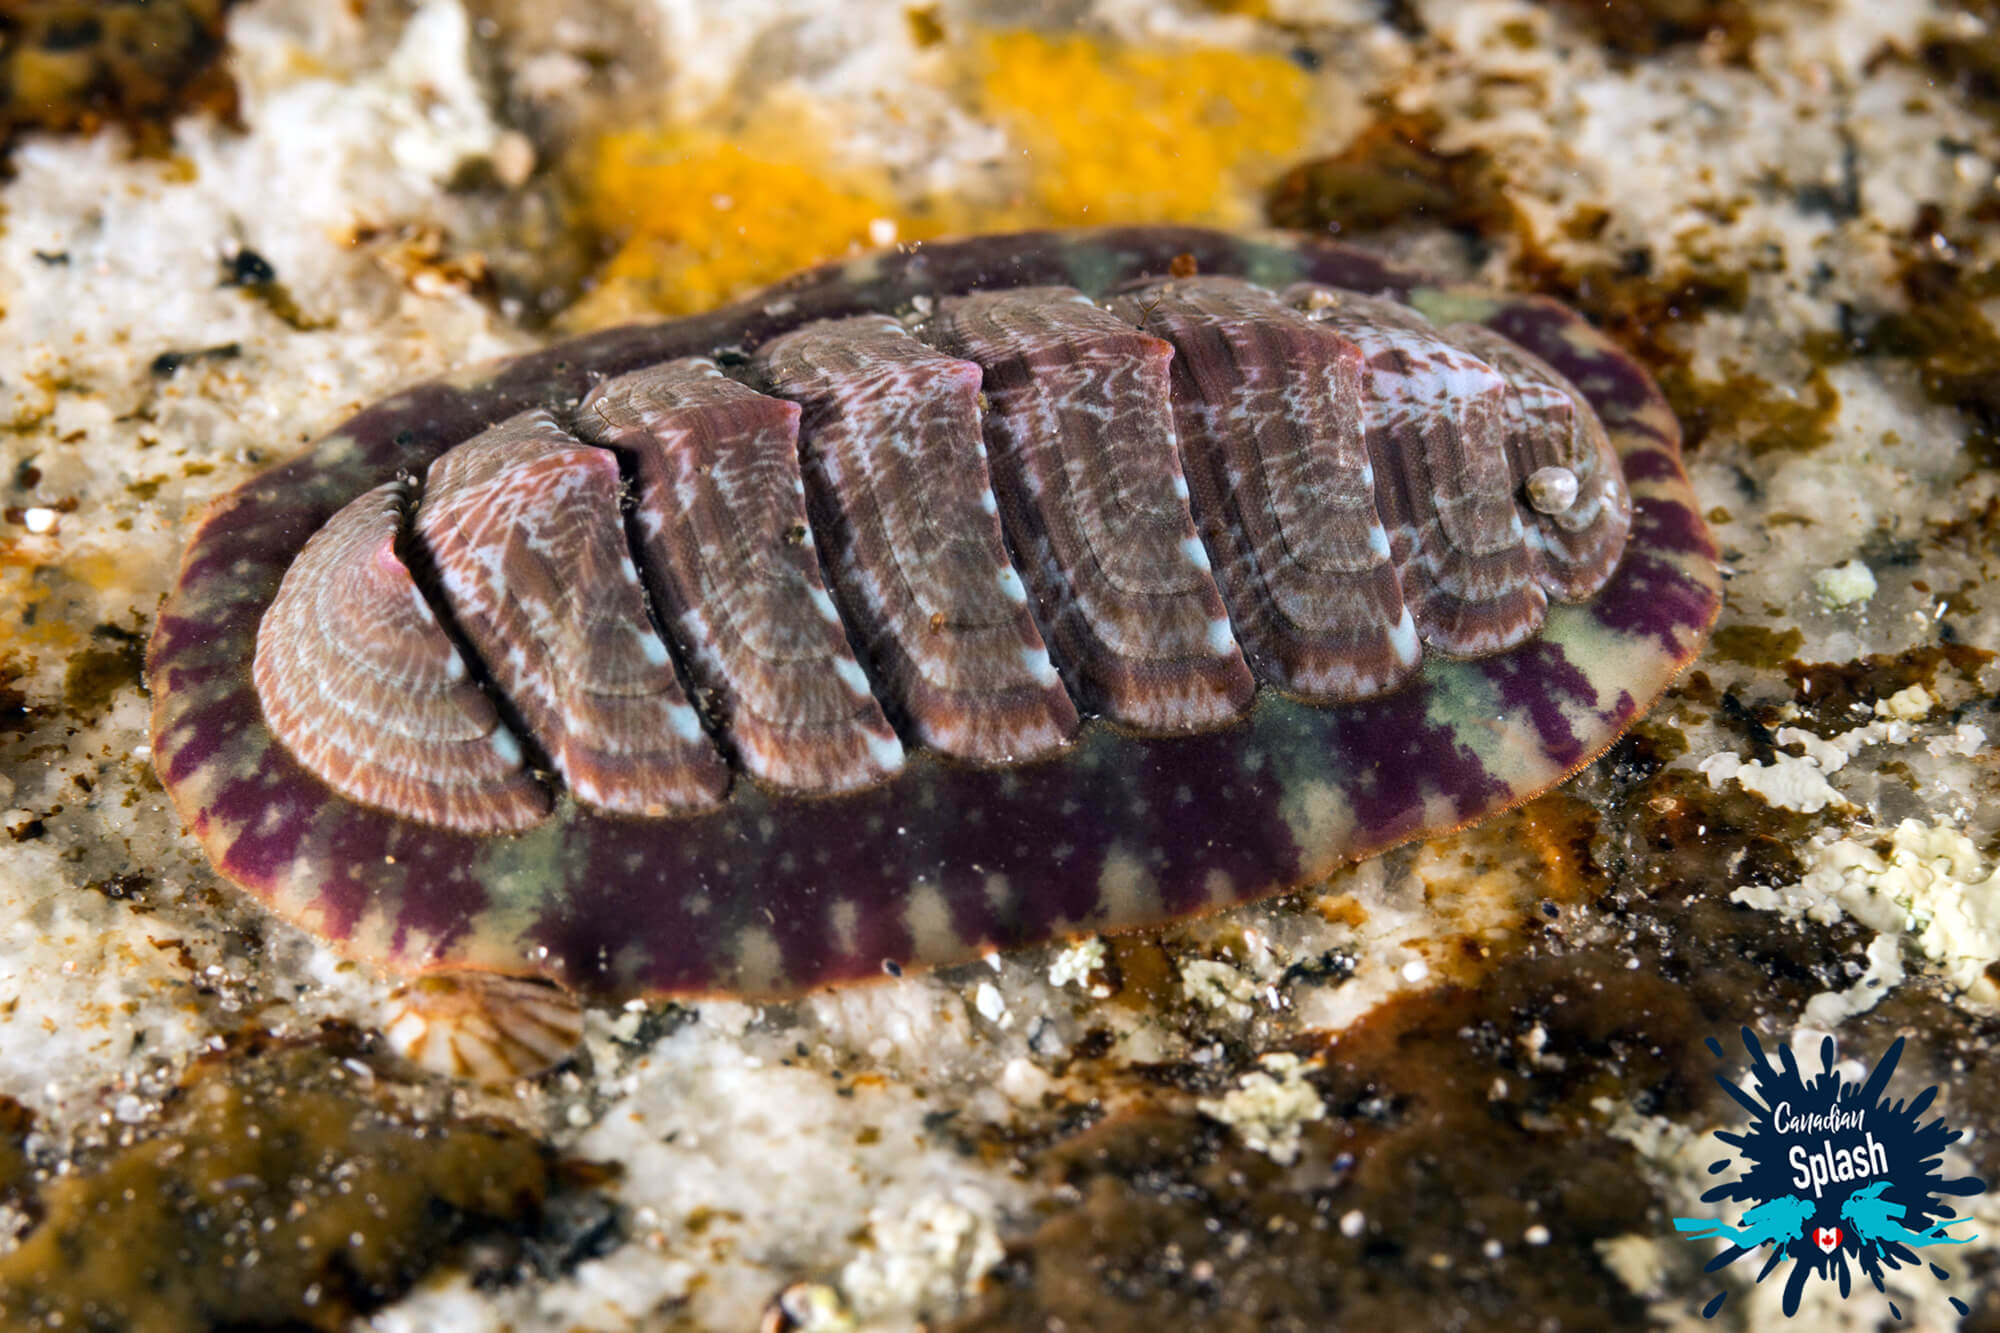 Scuba Diving and Finding a Purple Chiton on a Rock in Halifax and Surrounding Area, Nova Scotia, Canada's East Coast